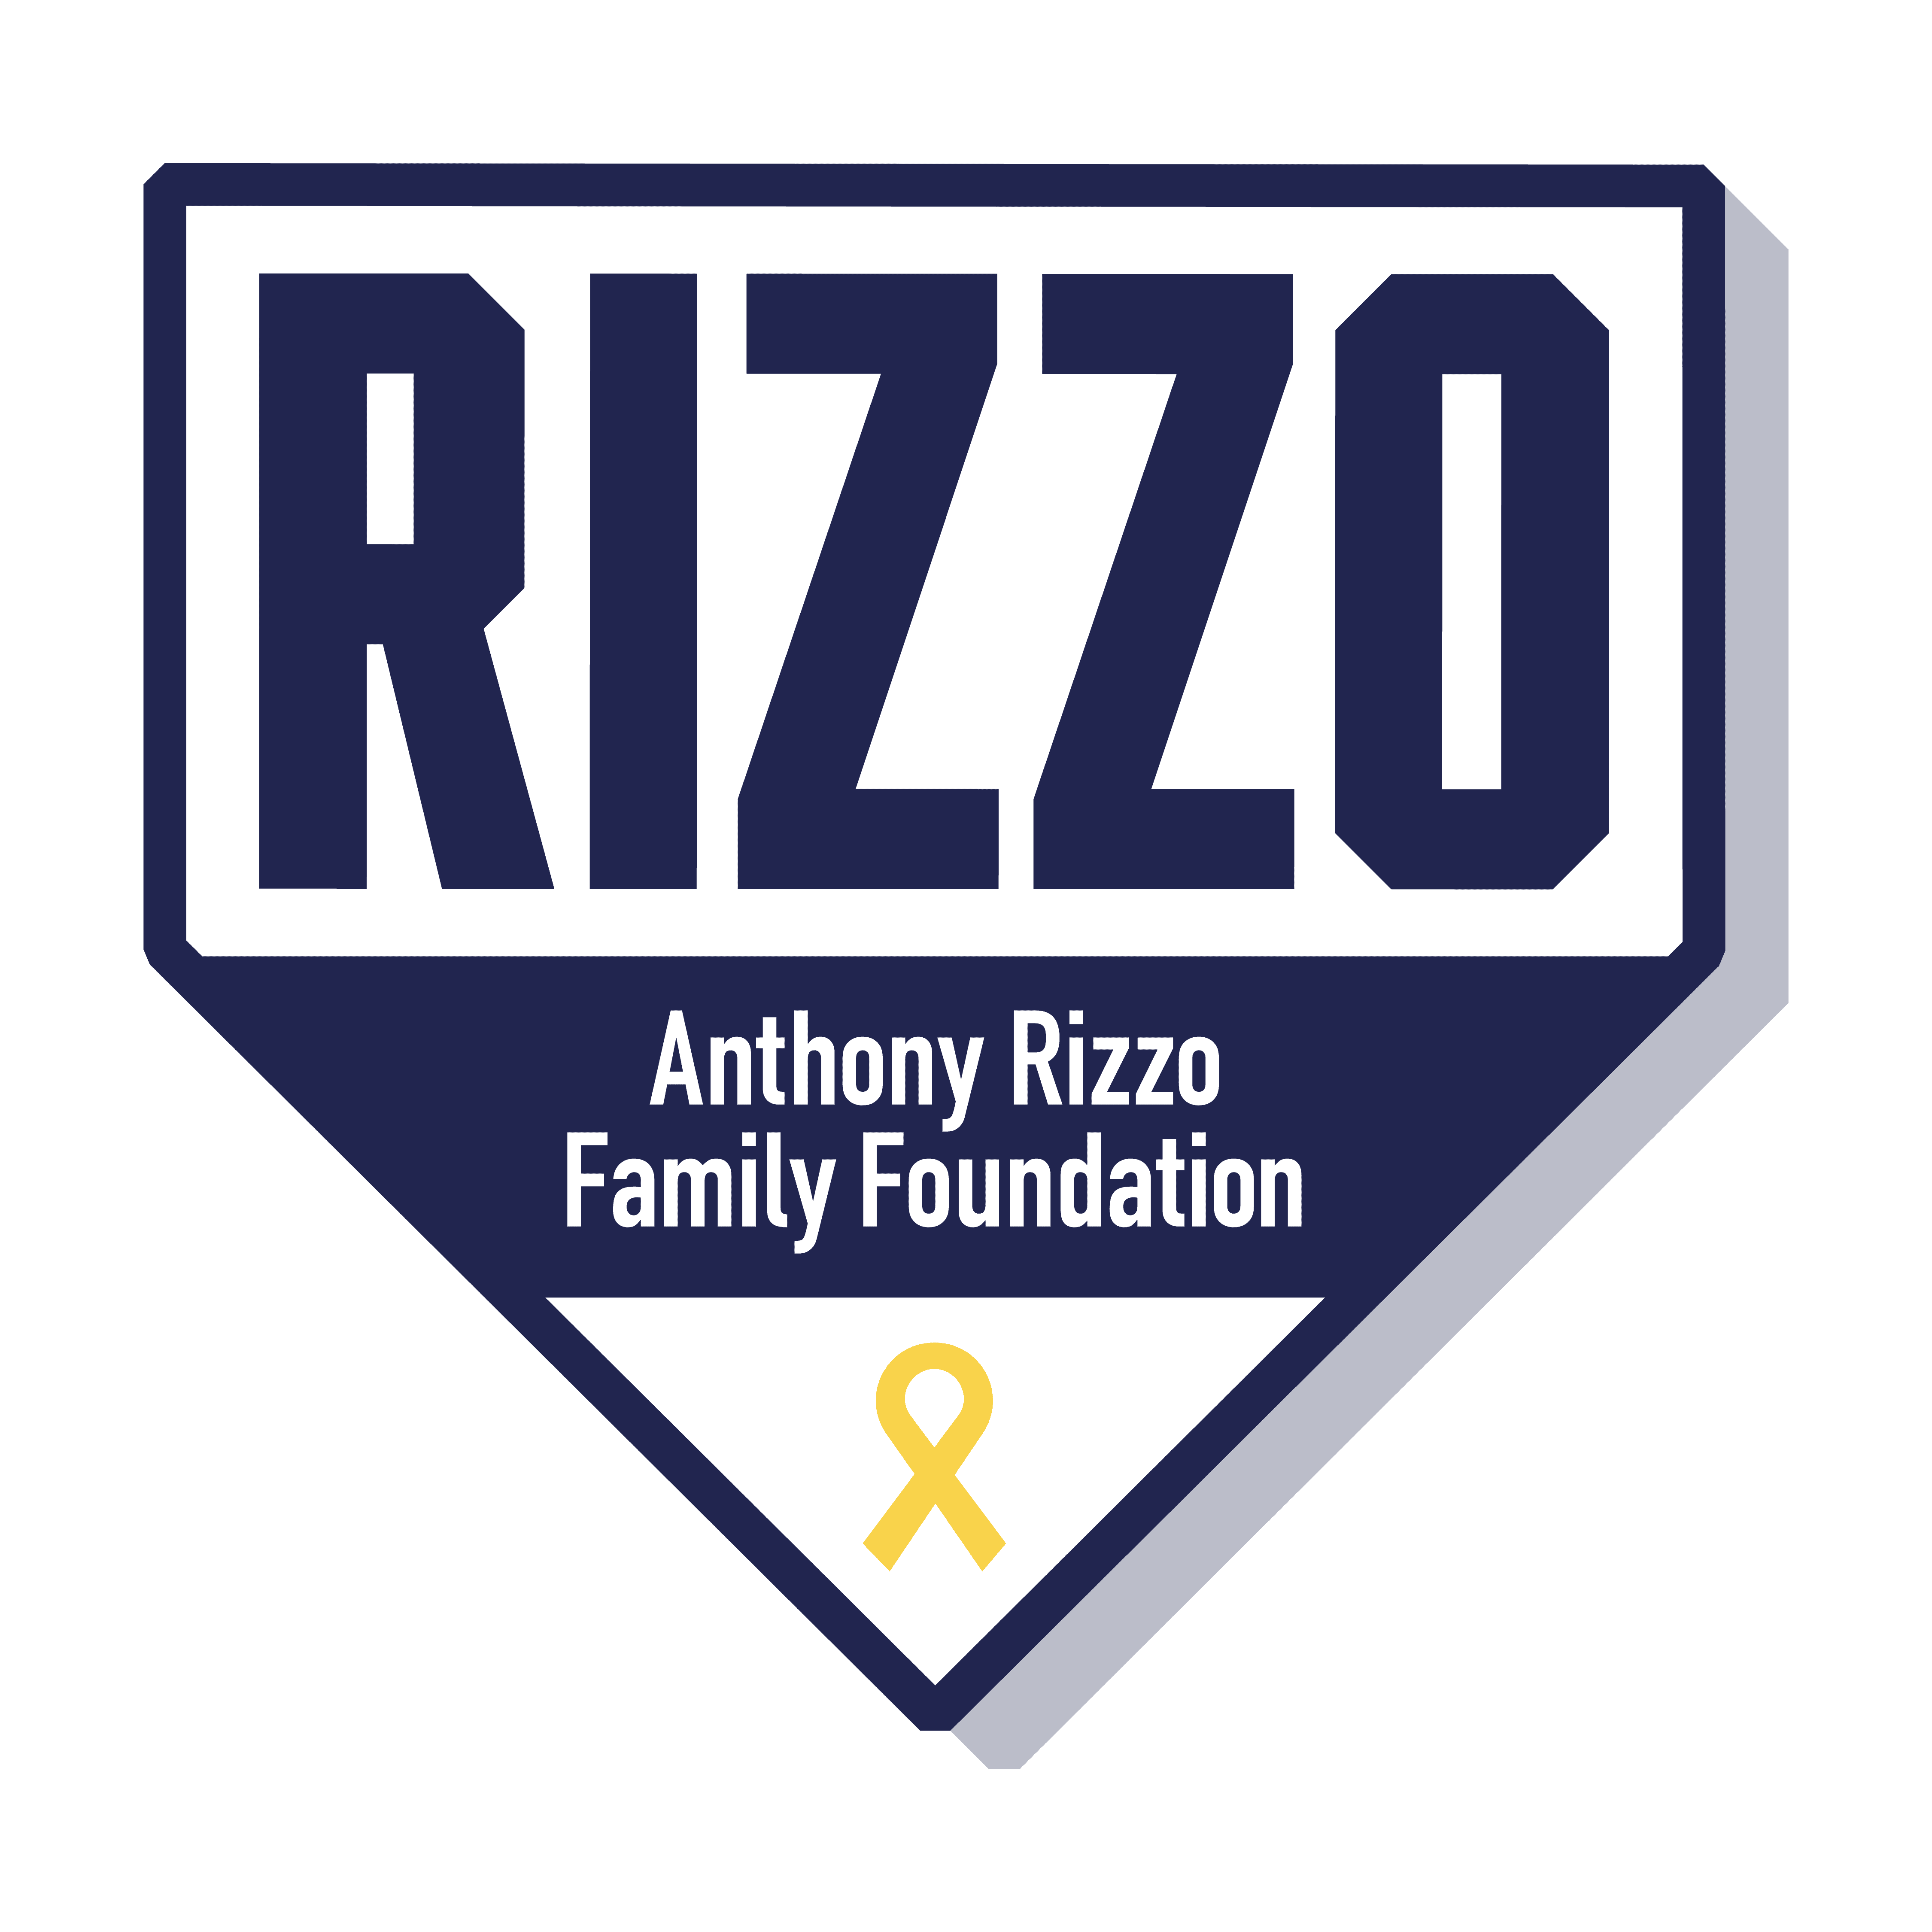 Anthony Rizzo Family Foundation!